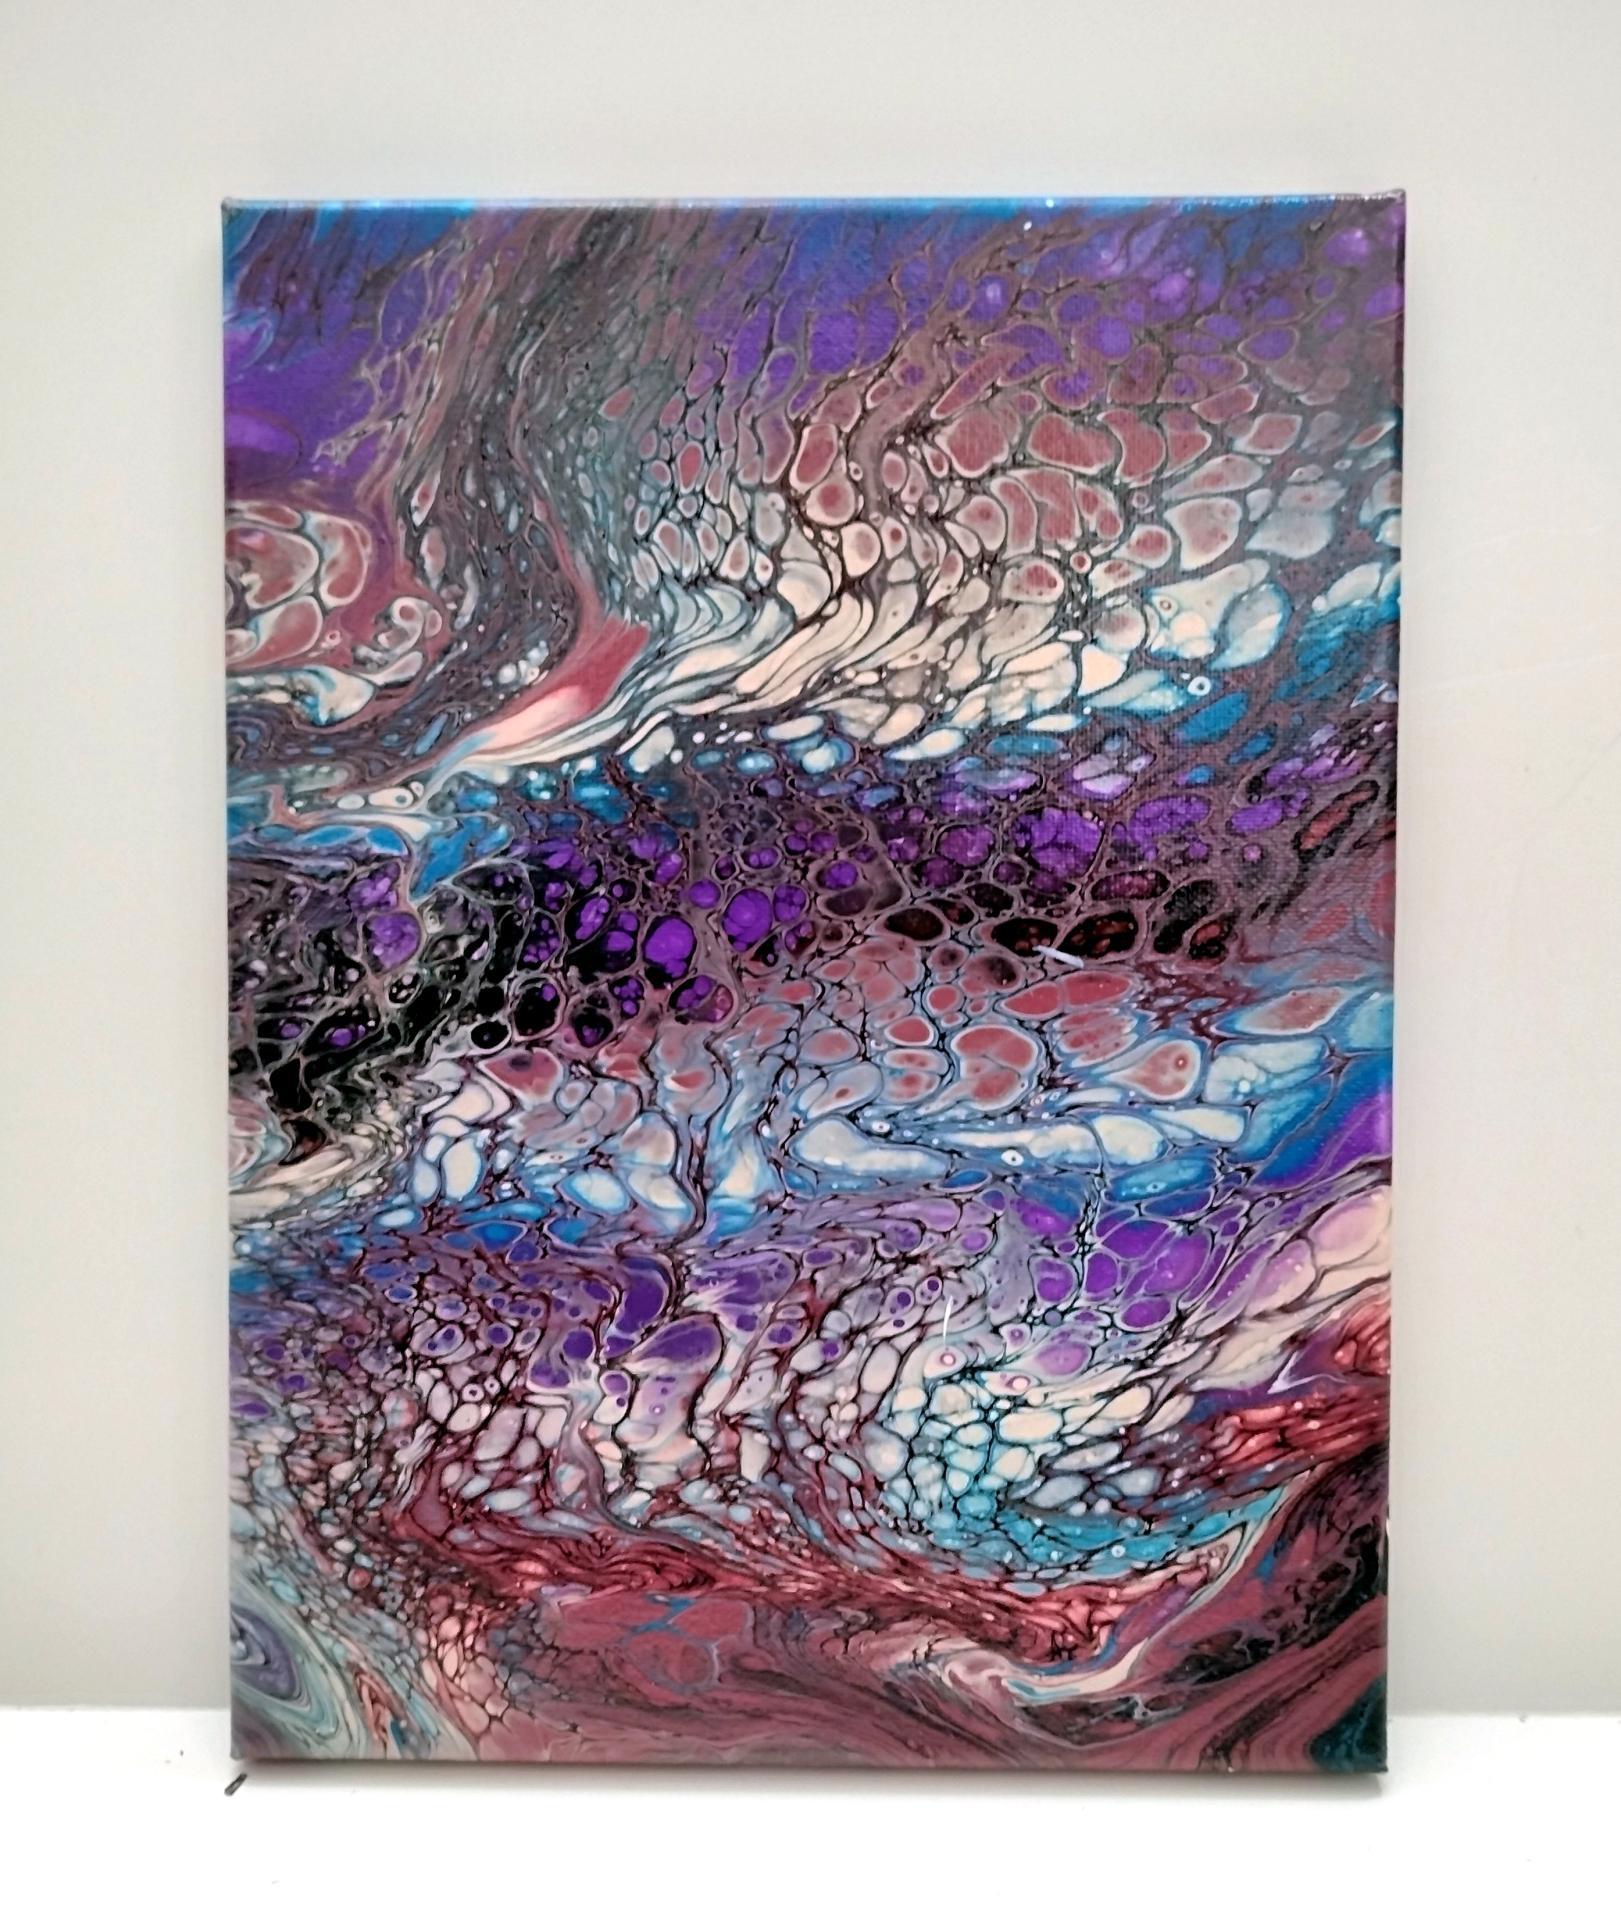 Purple, Pink, and Blue Abstract Original Acrylic Pour Painting, 9" x 12", Fluid Art Painting